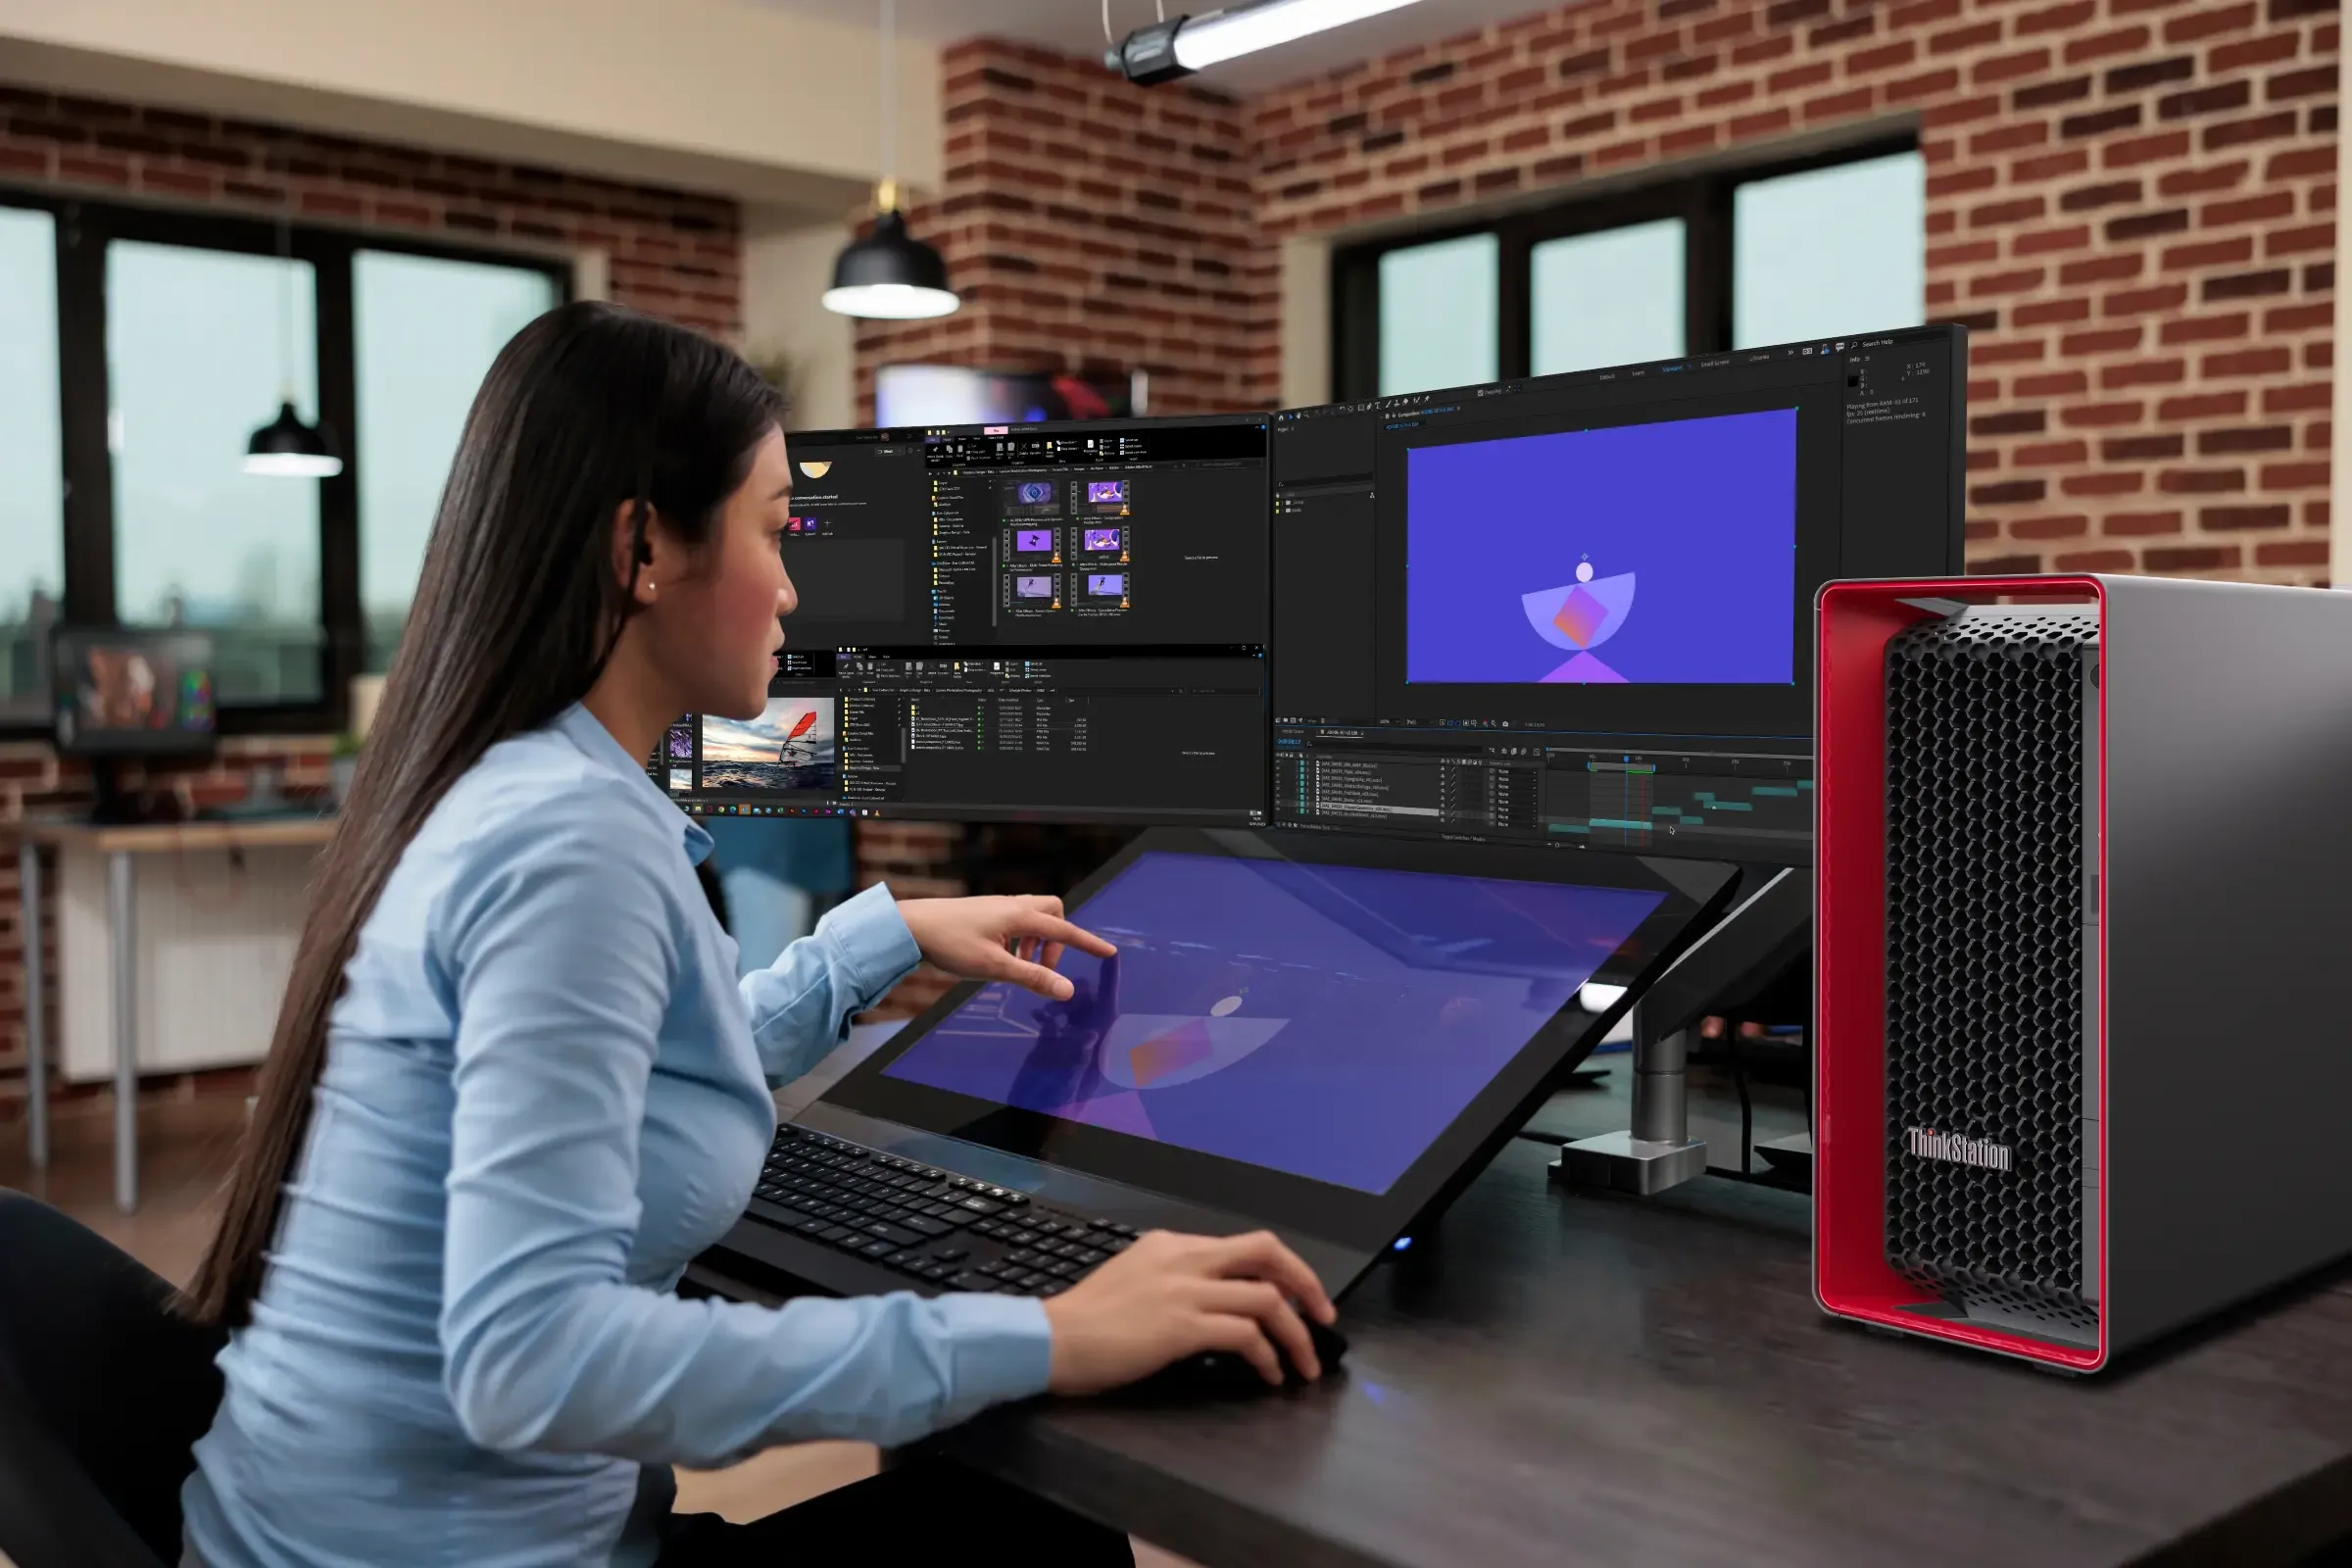 Lenovo partners with Aston Martin to design blazing fast workstations